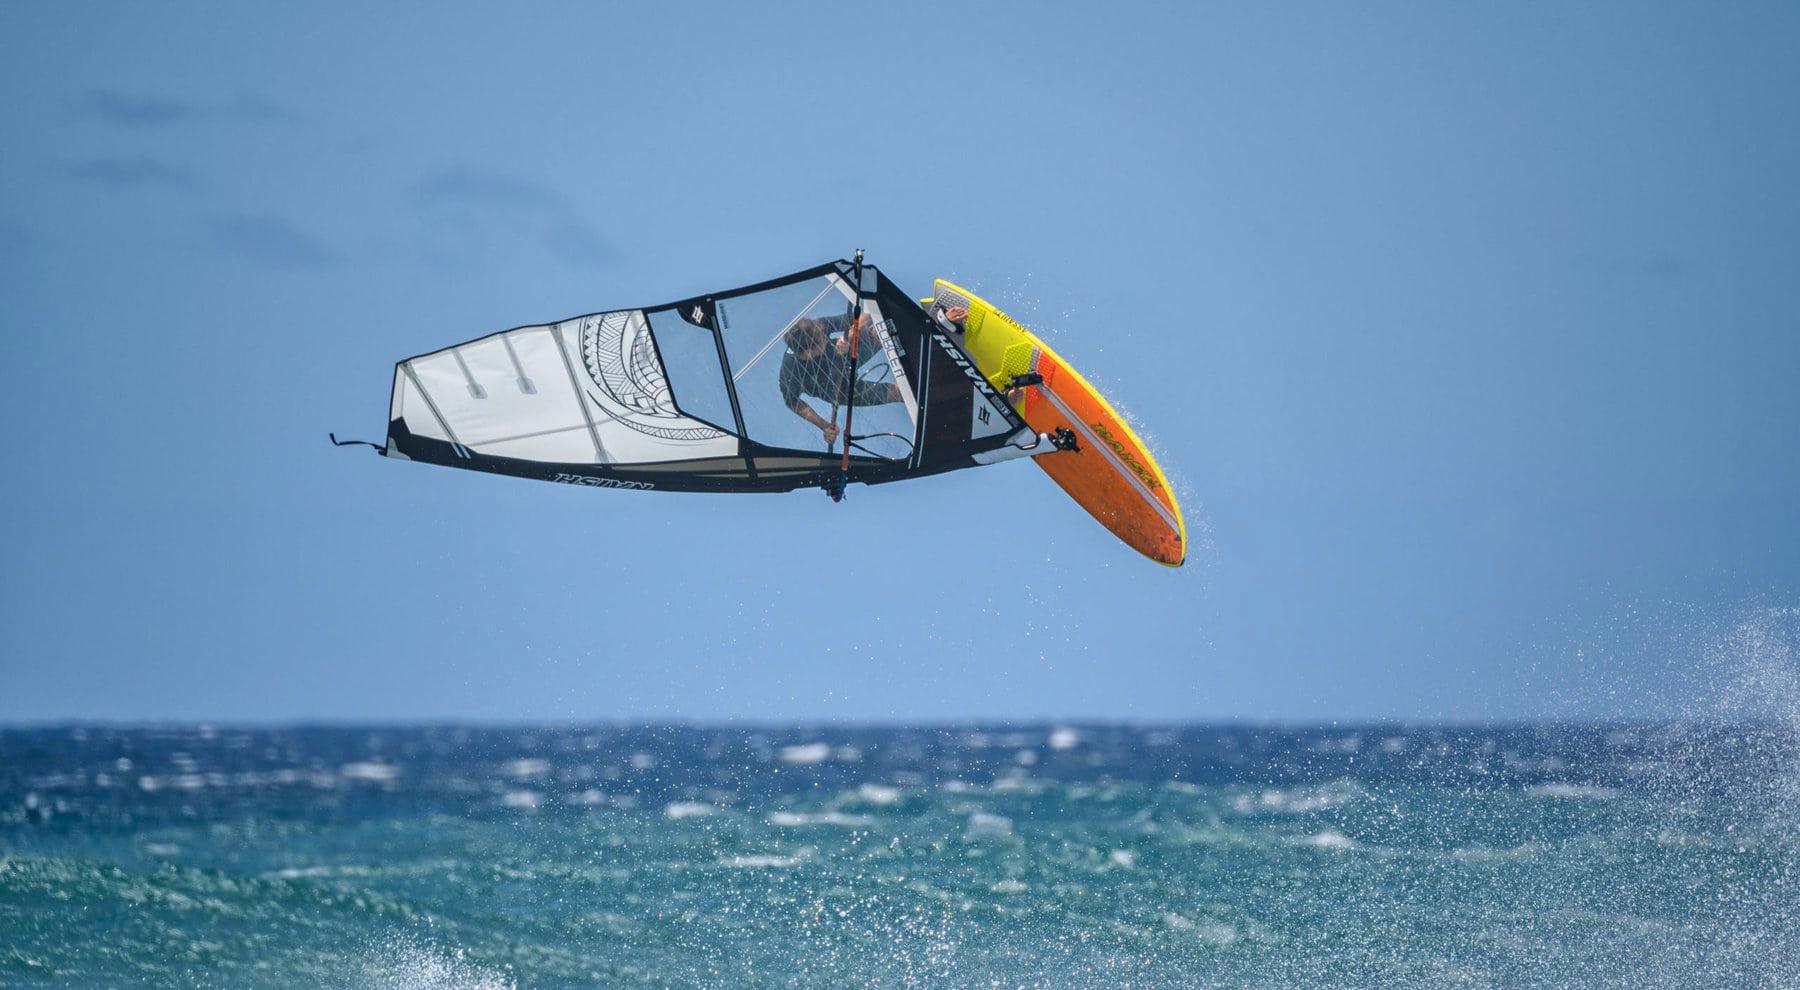 Naish Proudly Welcomes Z Schettewi to the International Windsurfing Team - Naish.com